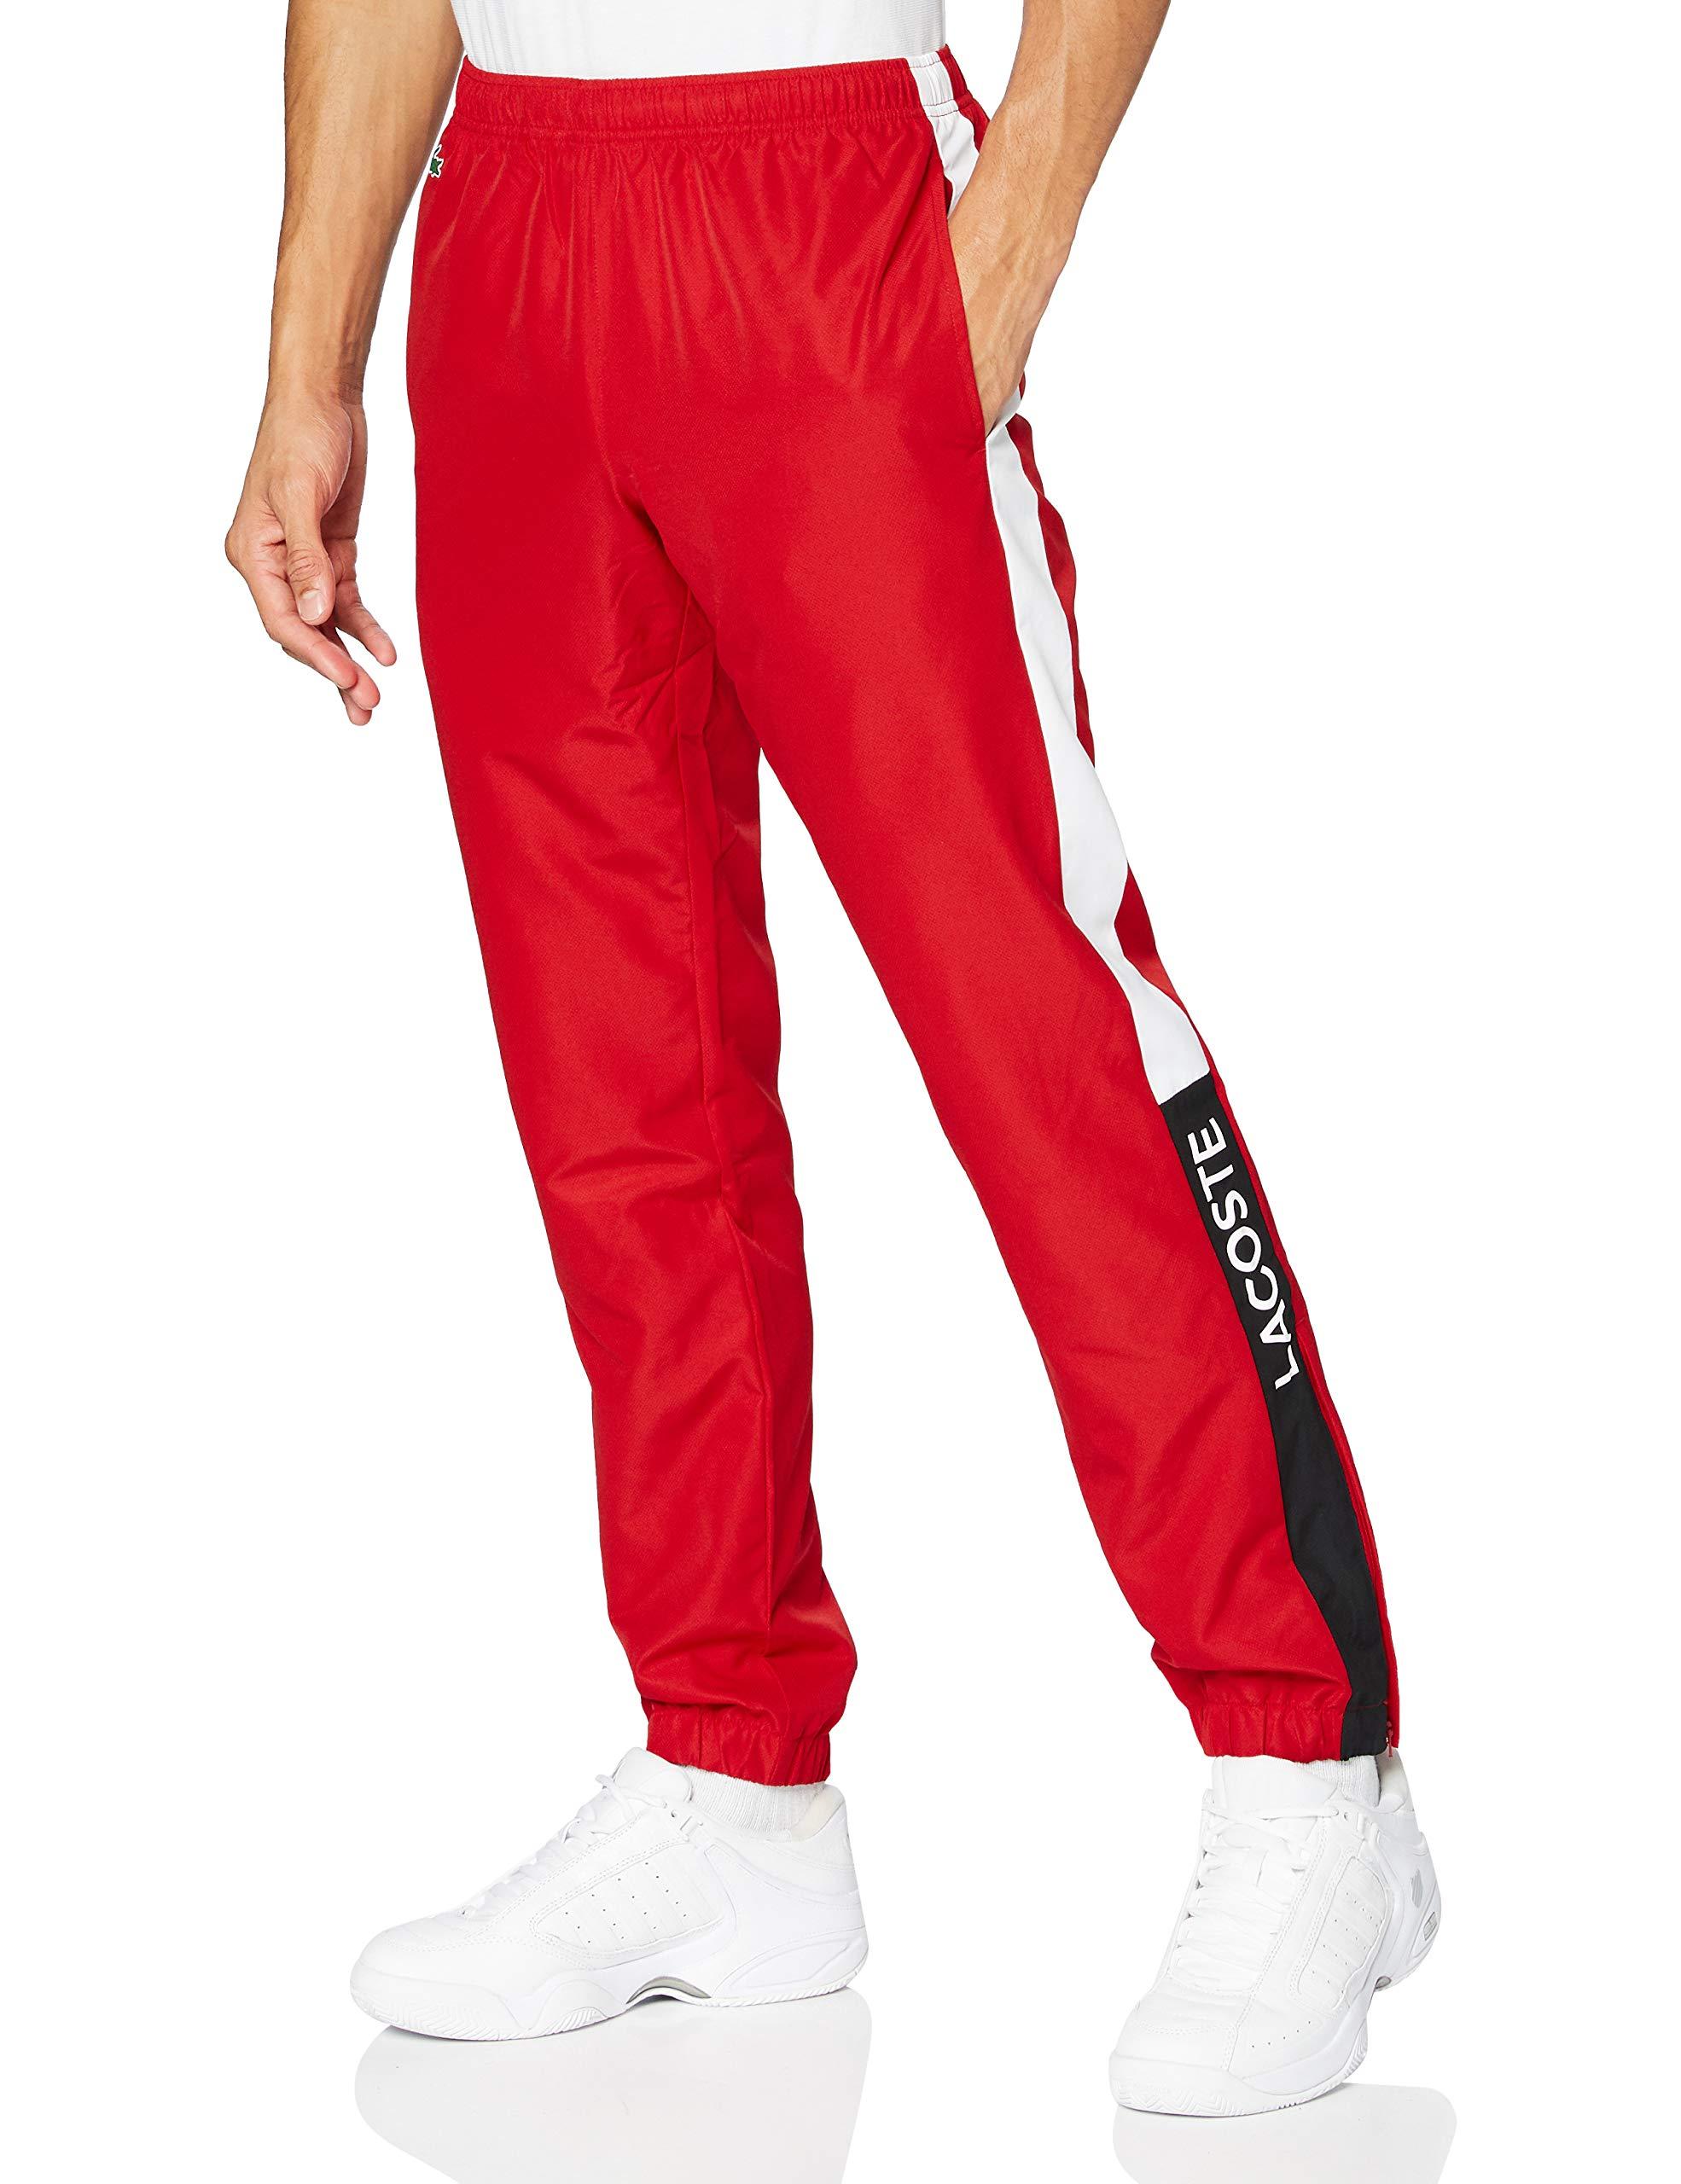 Lacoste Xh3661 Track Pants in Red for Men - Lyst